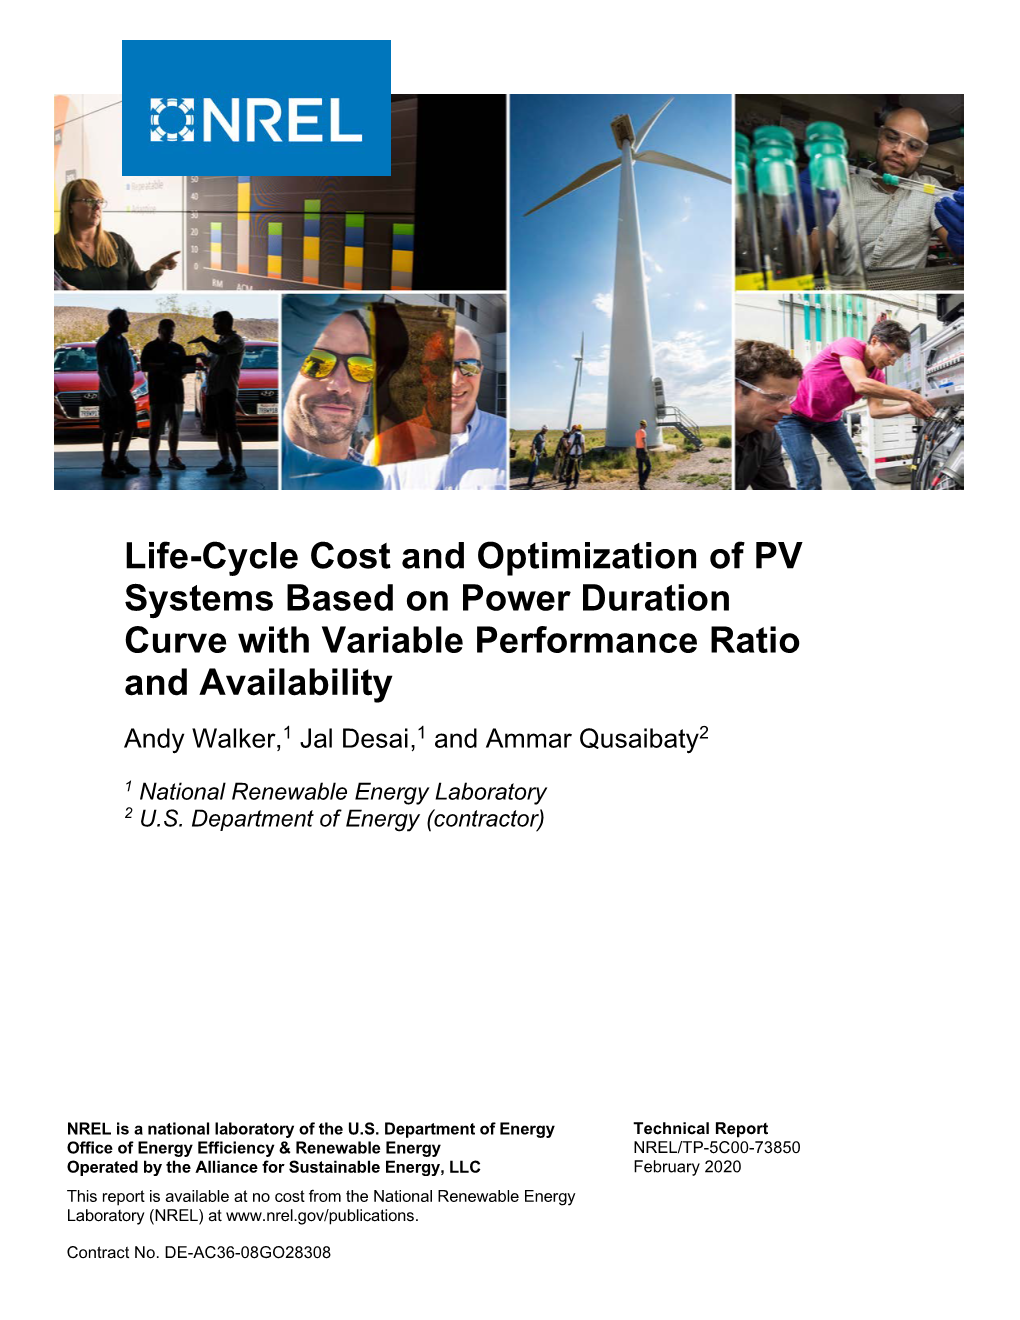 Life-Cycle Cost and Optimization of PV Systems Based on Power Duration Curve with Variable Performance Ratio and Availability